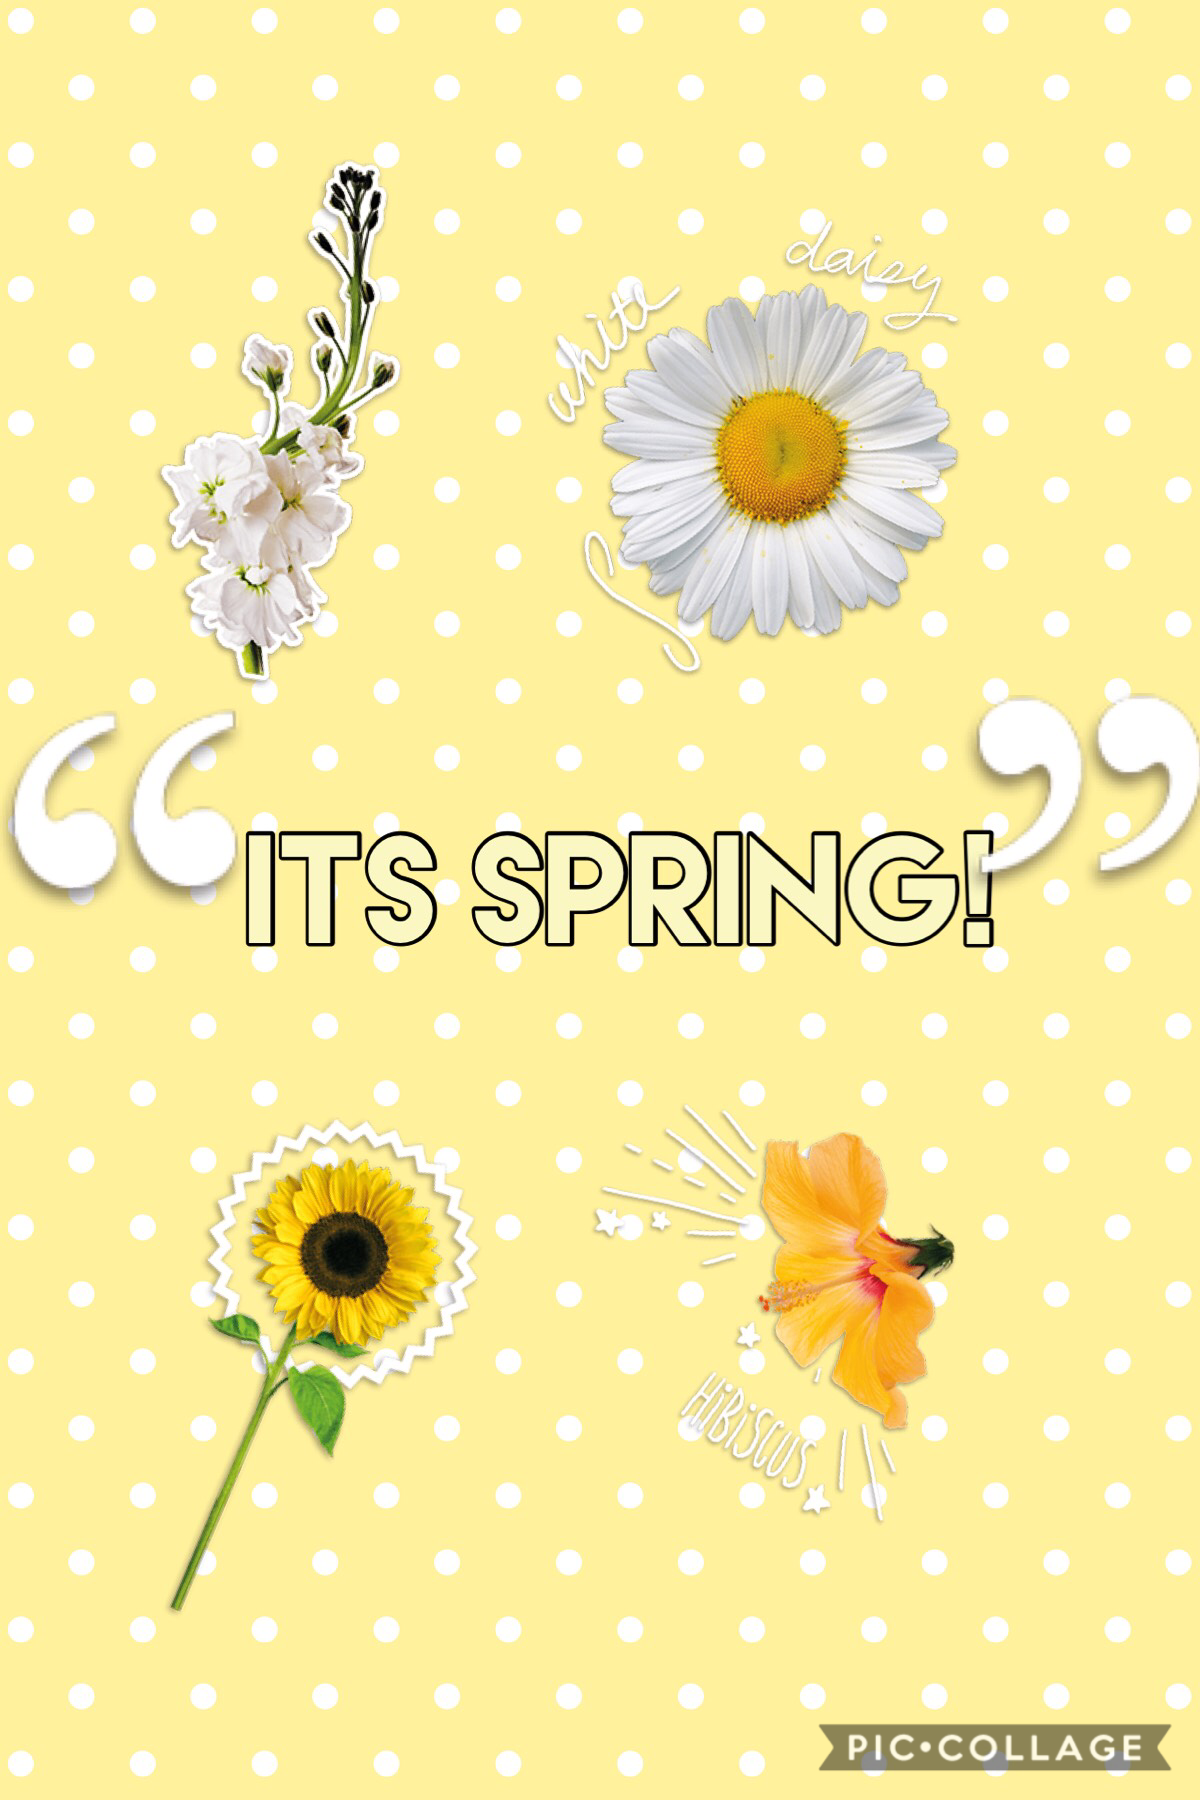 Yay! It’s finally SPRING! Like if you love spring! #first post